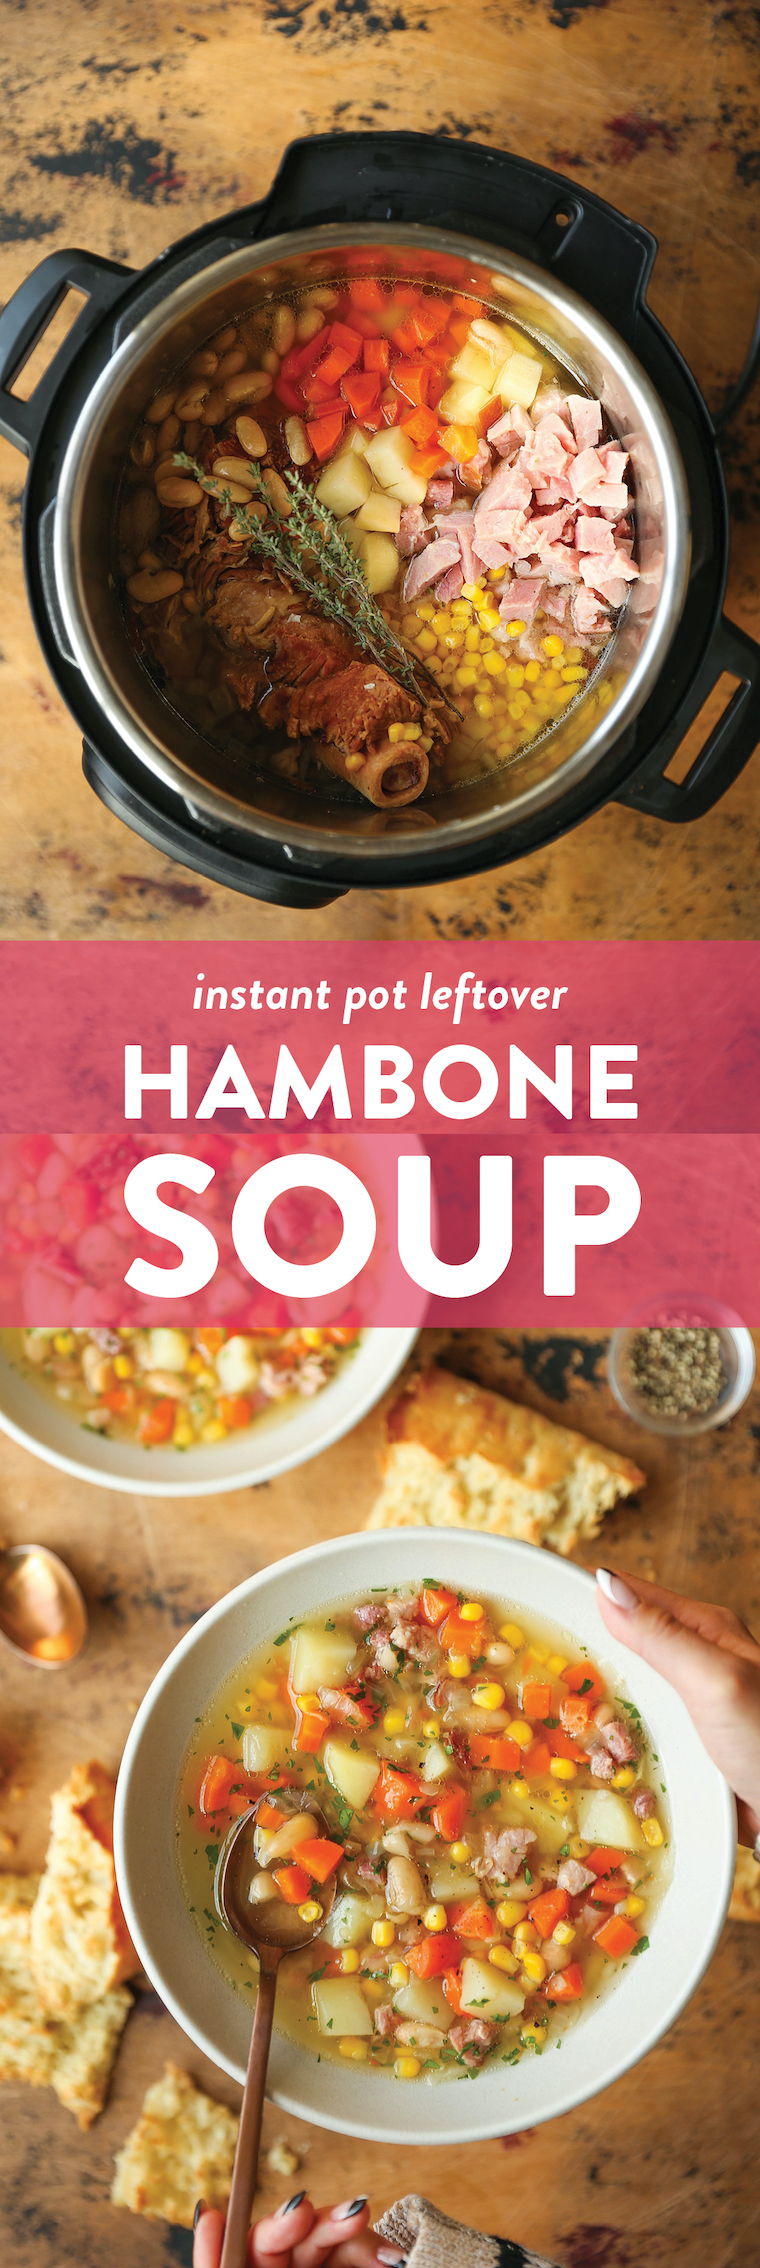 Instant Pot Leftover Hambone Soup - The best way to use up leftover ham! With the most flavorful broth, this hearty, cozy soup is so simple yet SO SO GOOD.